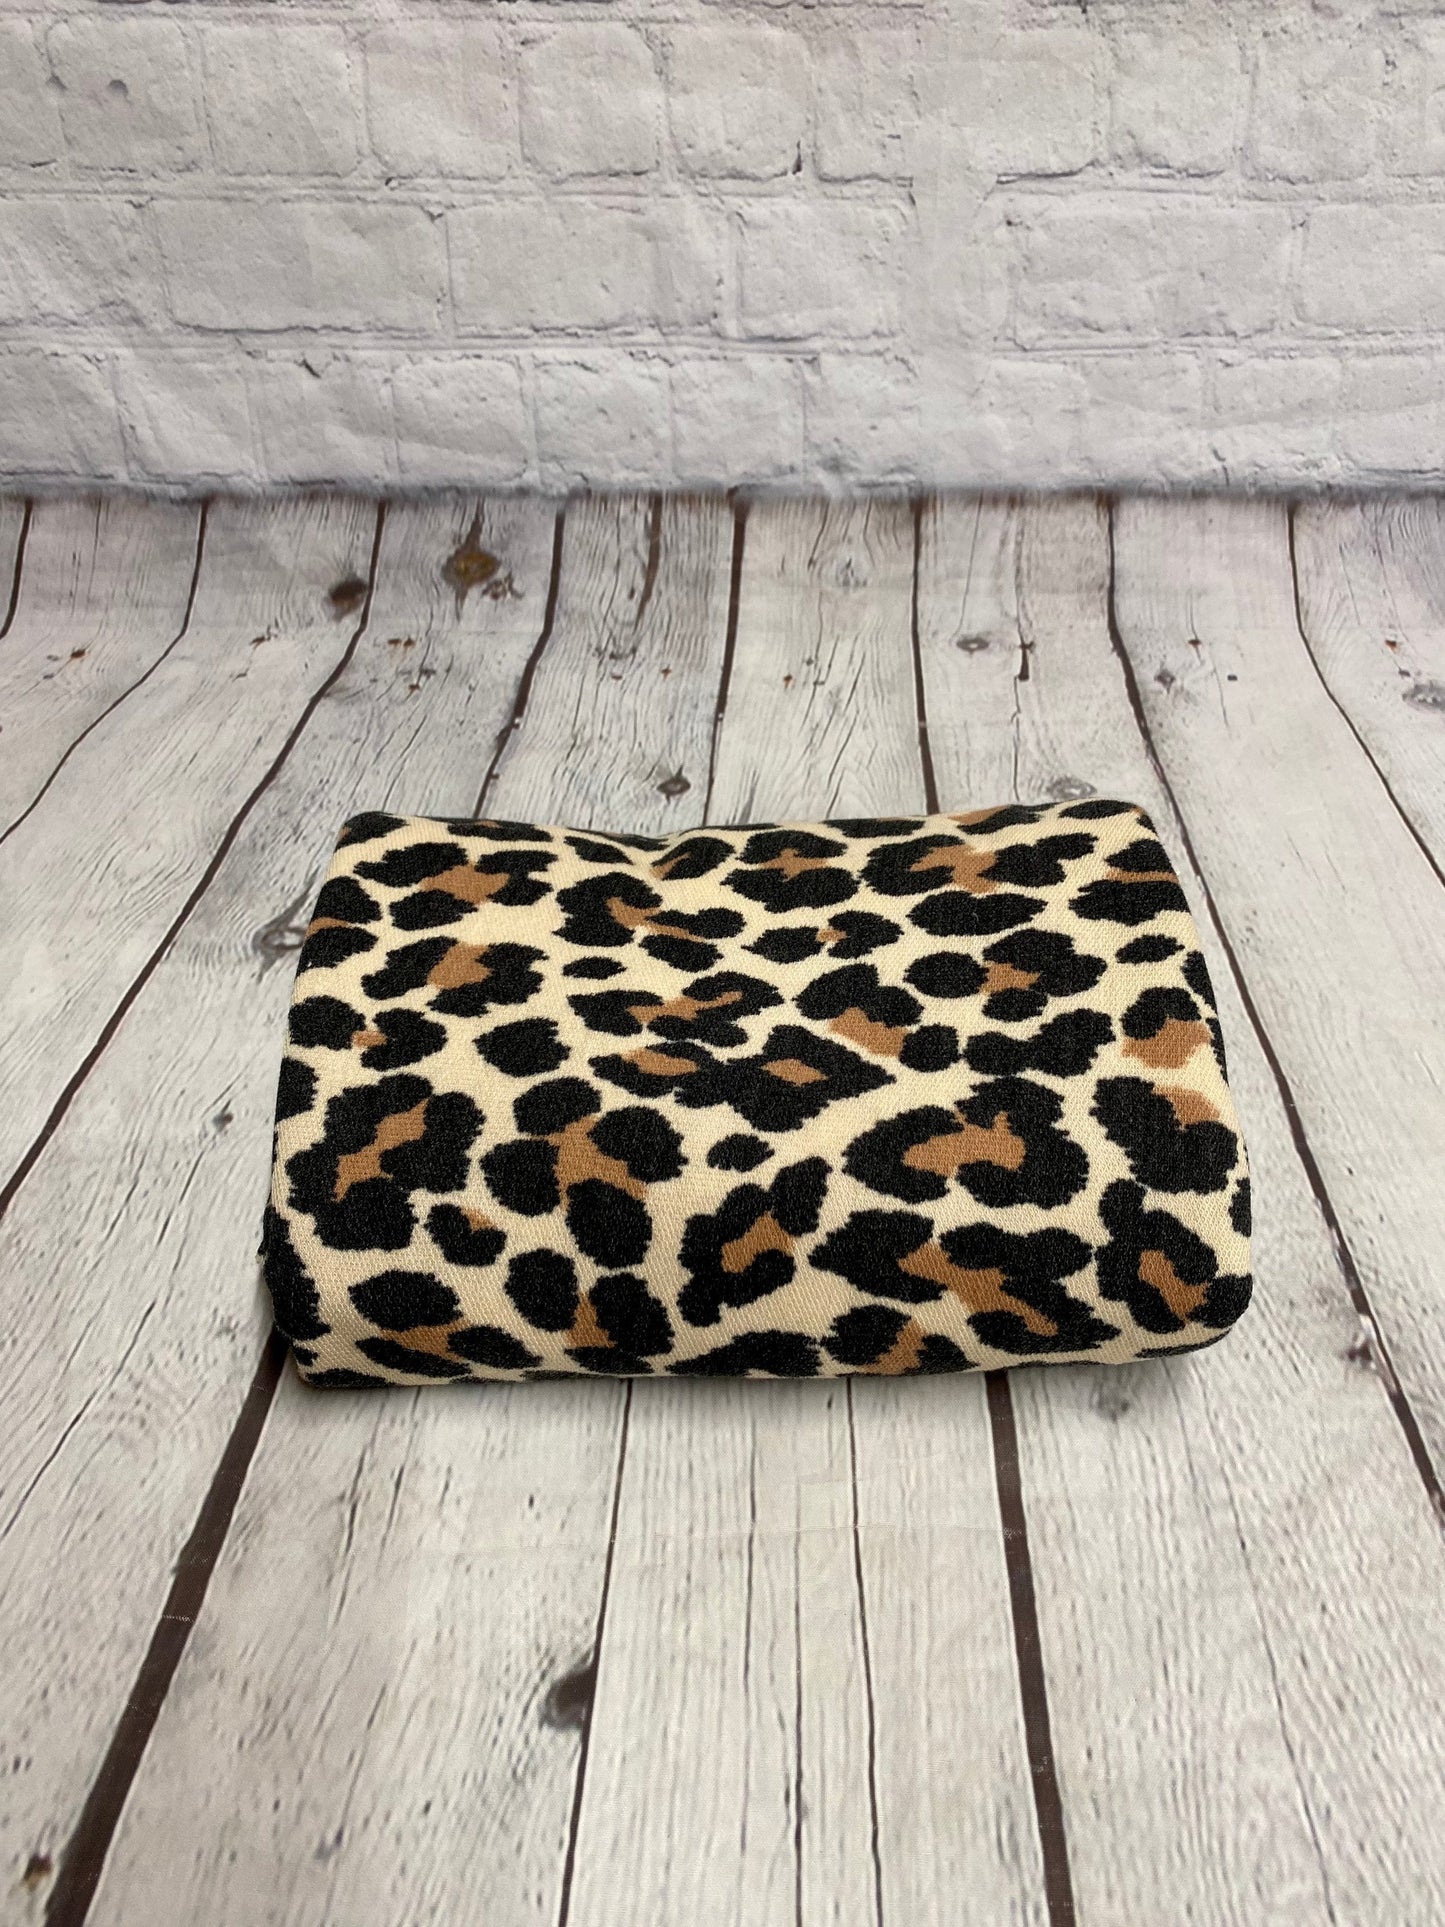 French Terry Animal Print Cheetah Leopard Print Fabric By The Yard